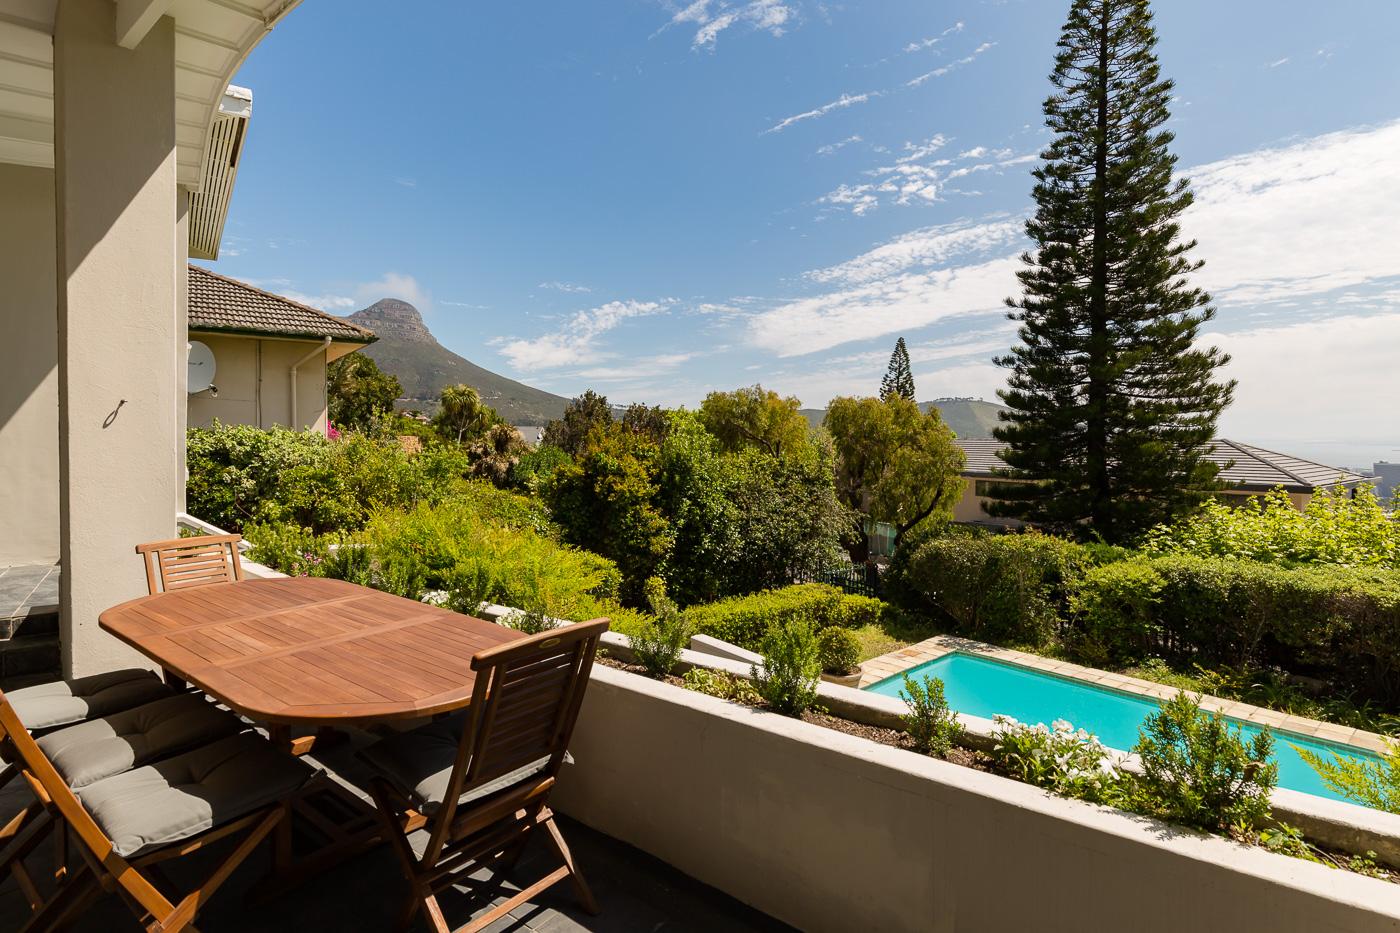 Photo 11 of Bella Montagna accommodation in Oranjezicht, Cape Town with 4 bedrooms and 2 bathrooms